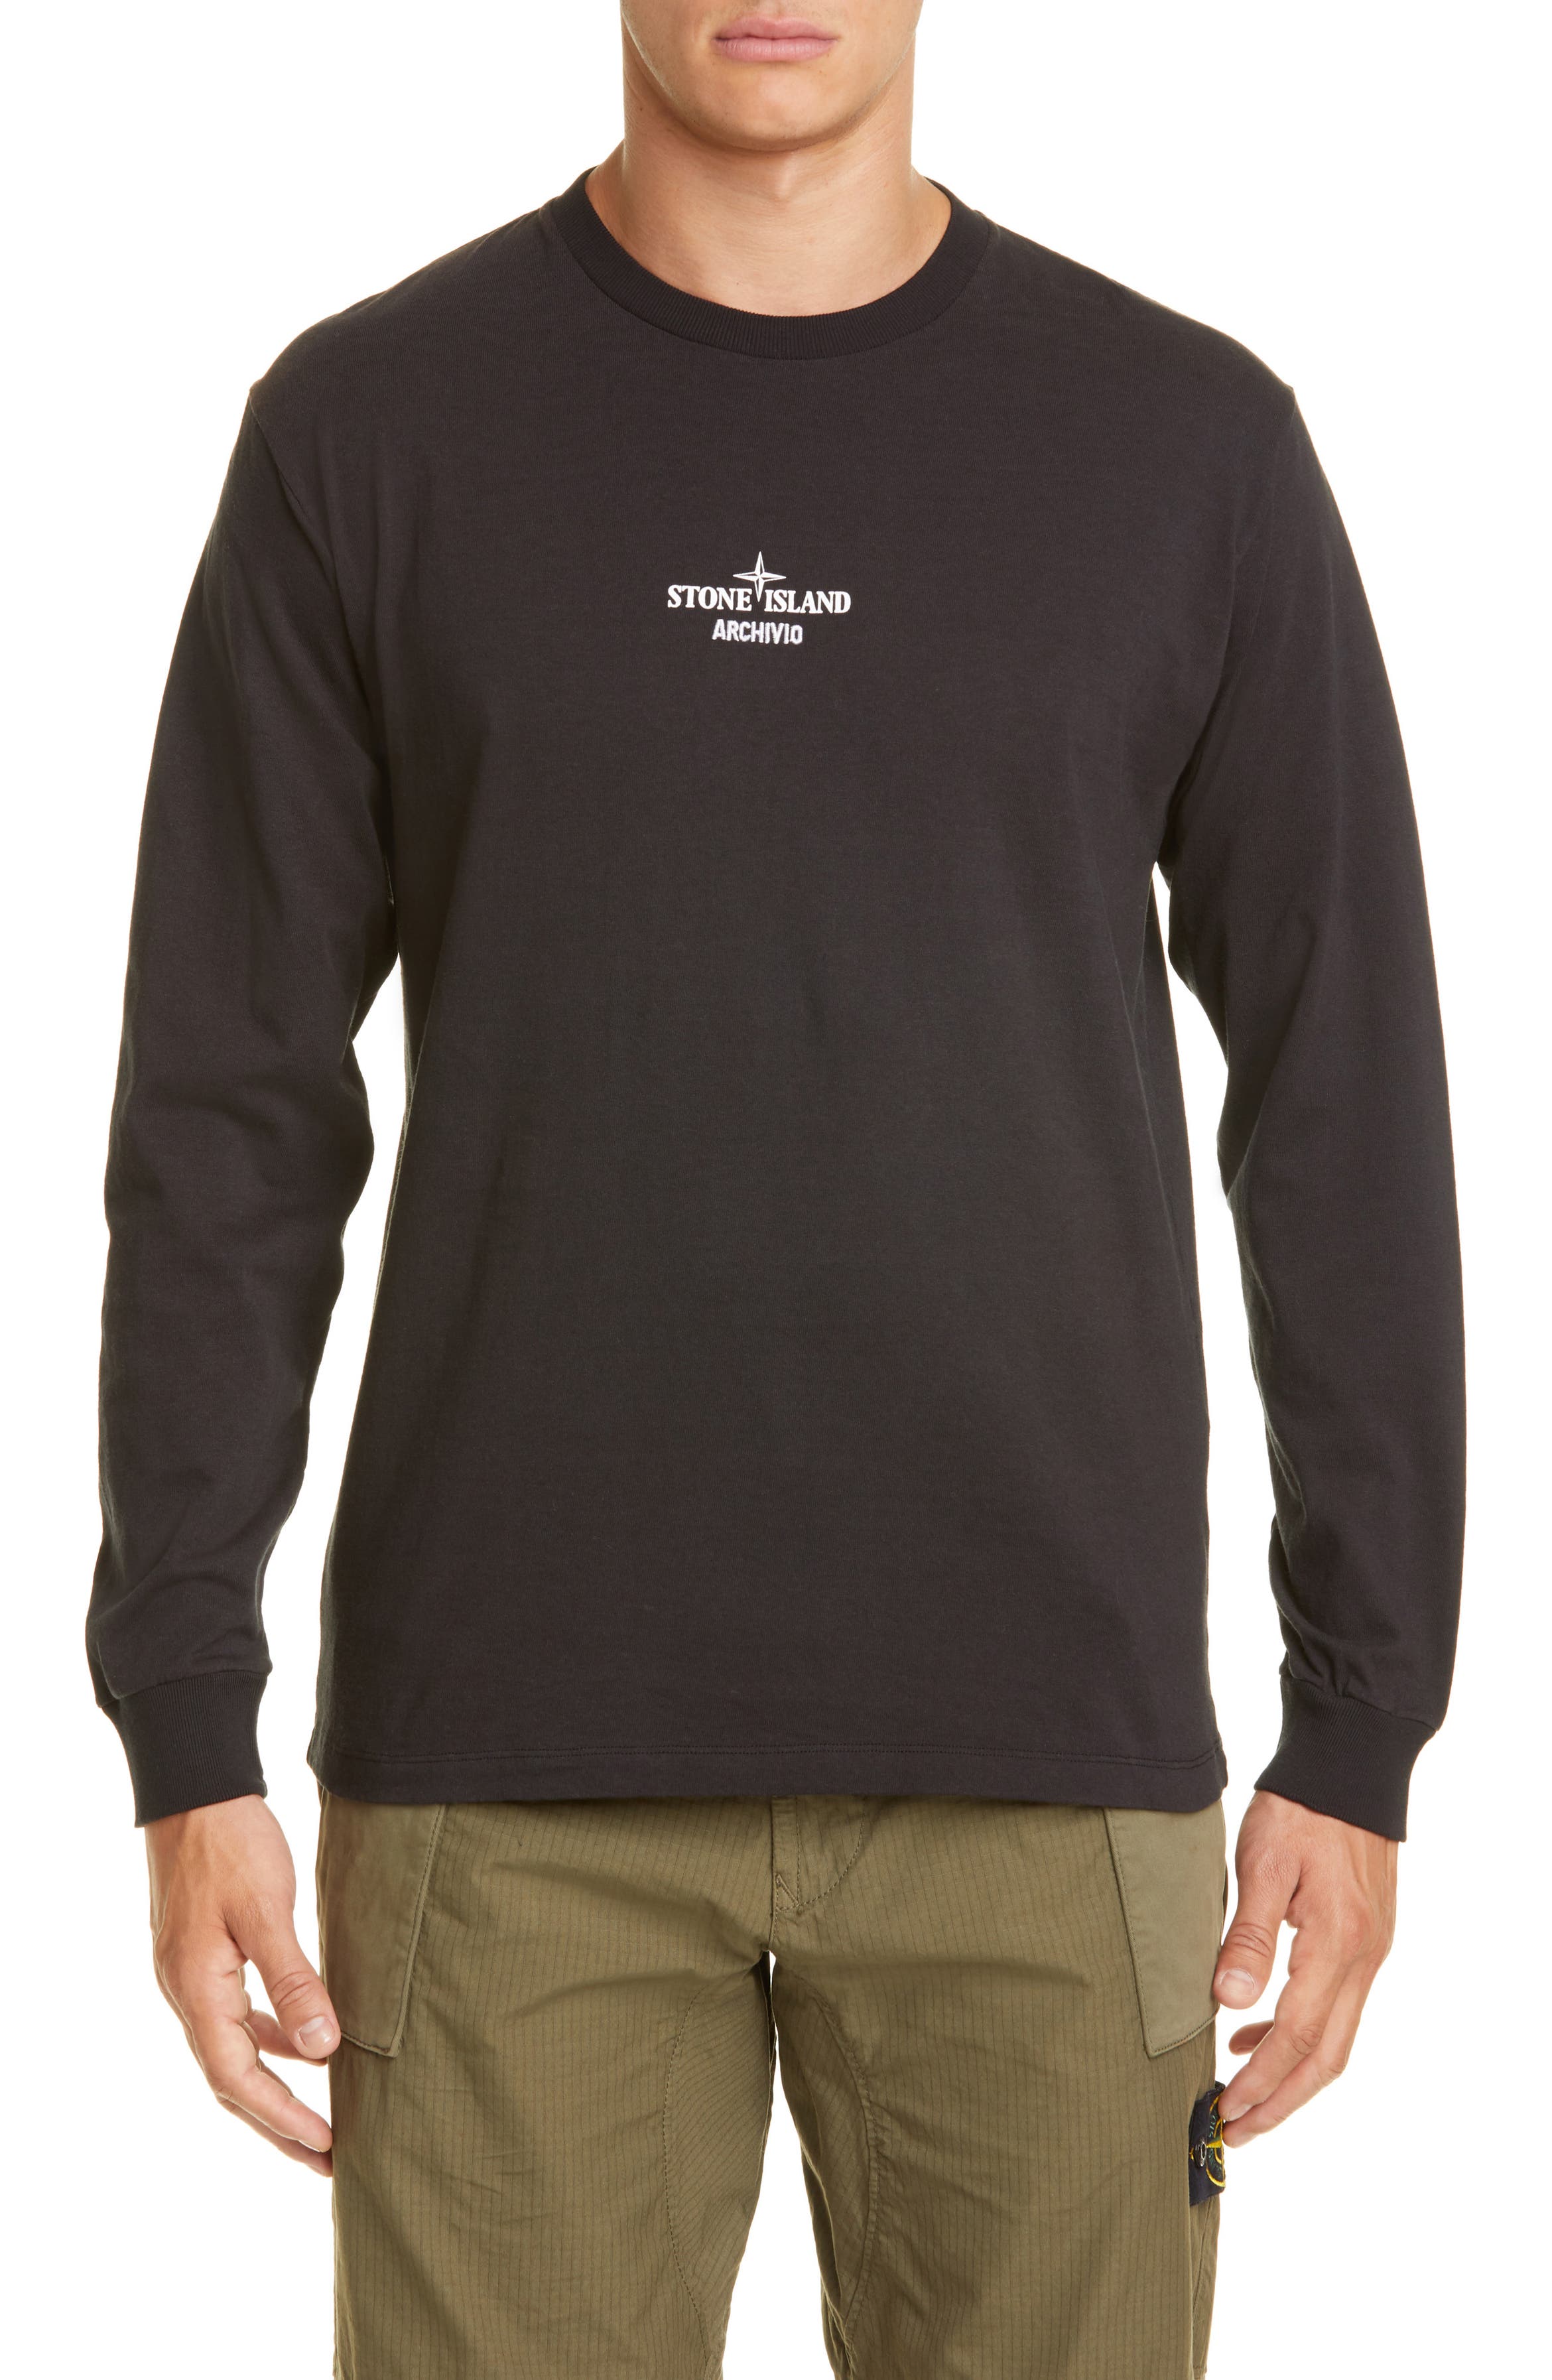 Stone Island Long Sleeve Product T-Shirt | Nordstrom